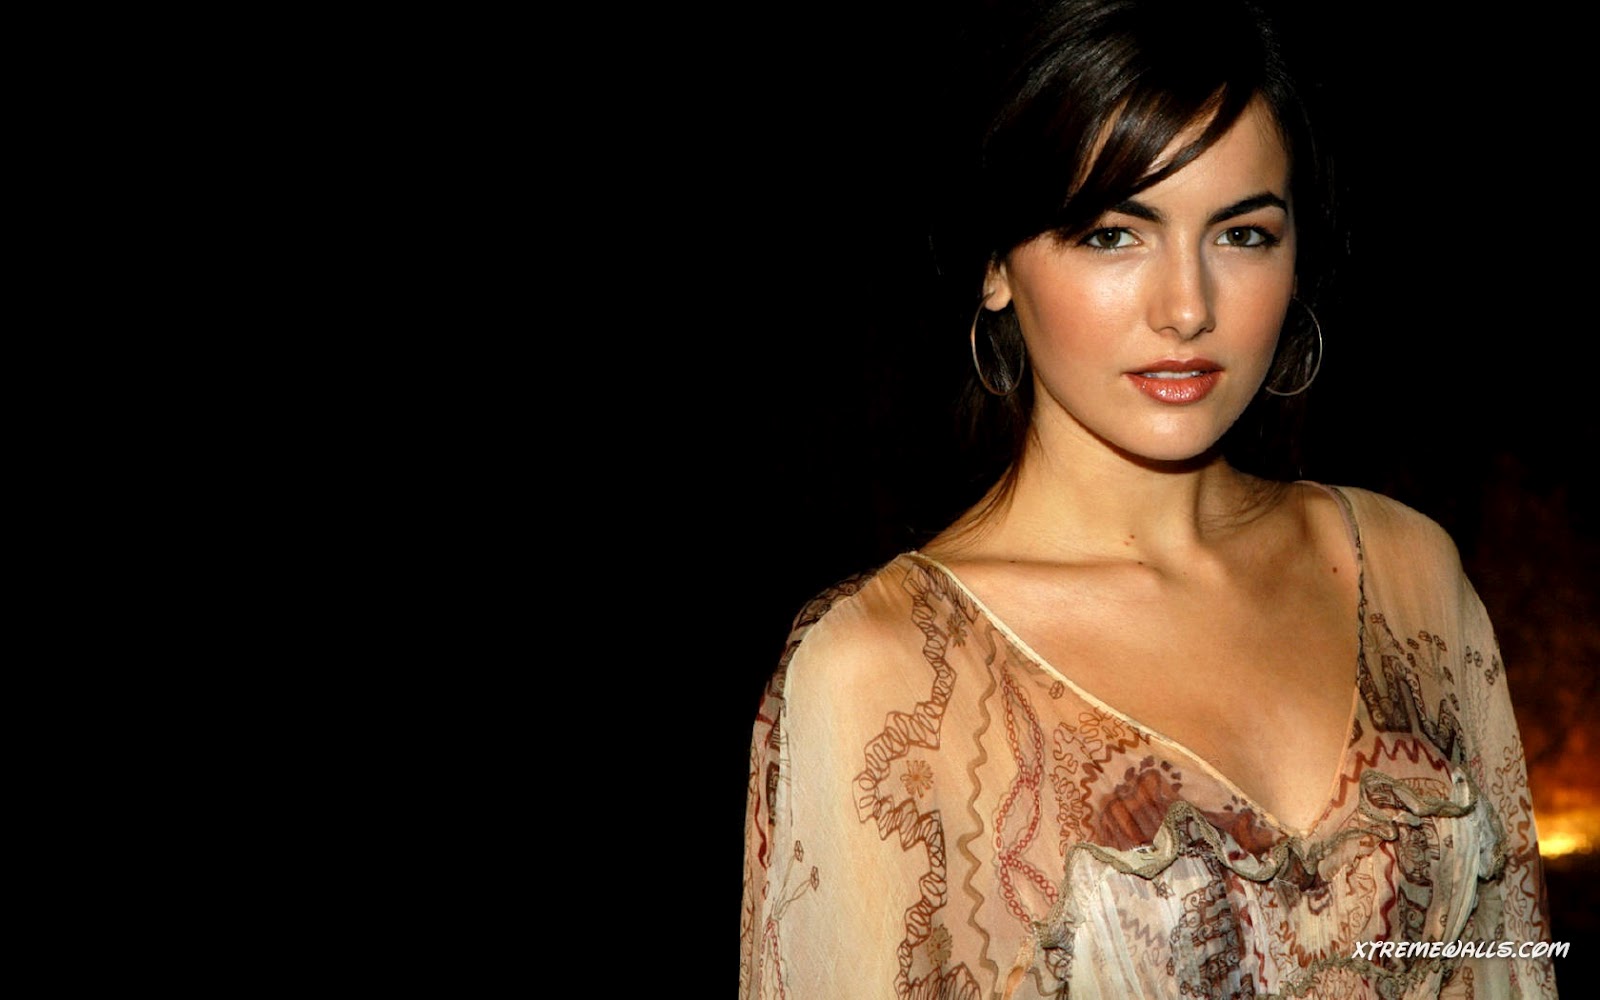 Lovely Wallpapers Camilla Belle Hot Wallpapers 2012